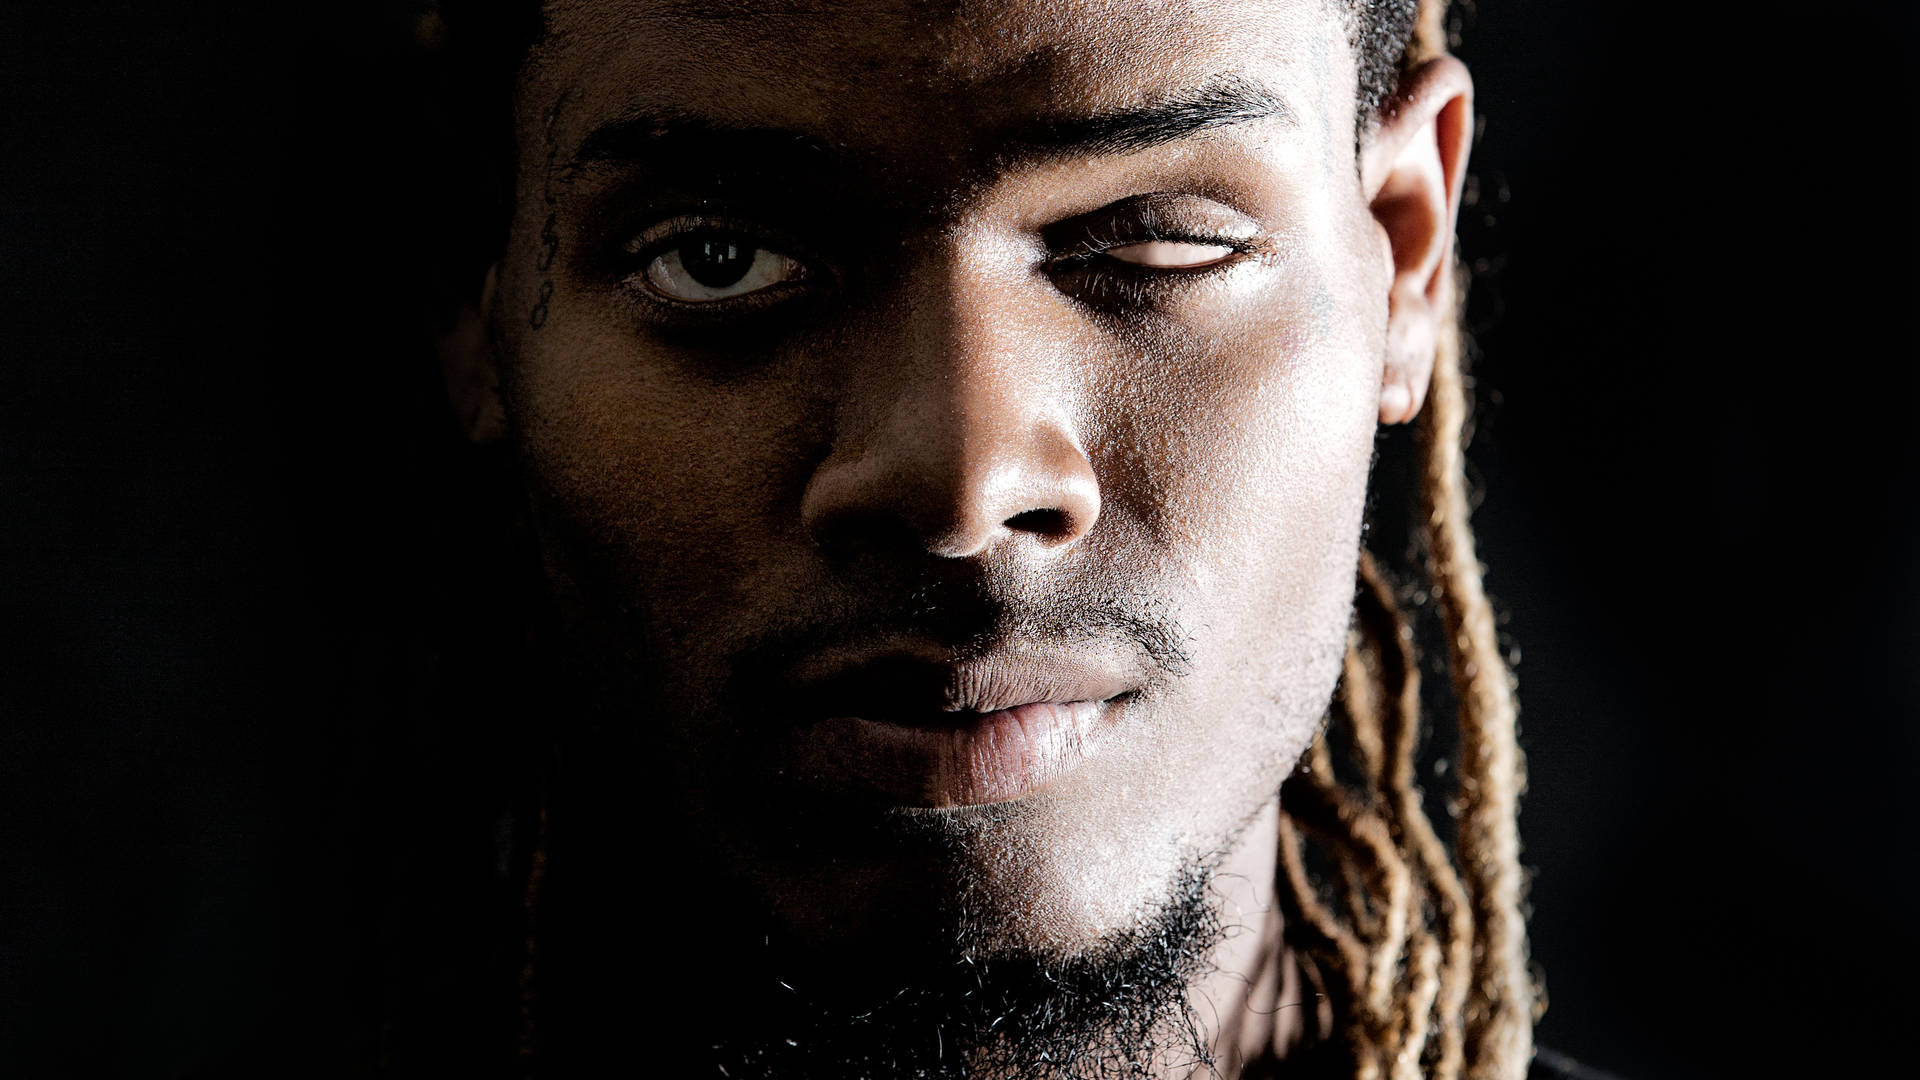 Award-winning Musician Fetty Wap Posing With Gold Chains Background